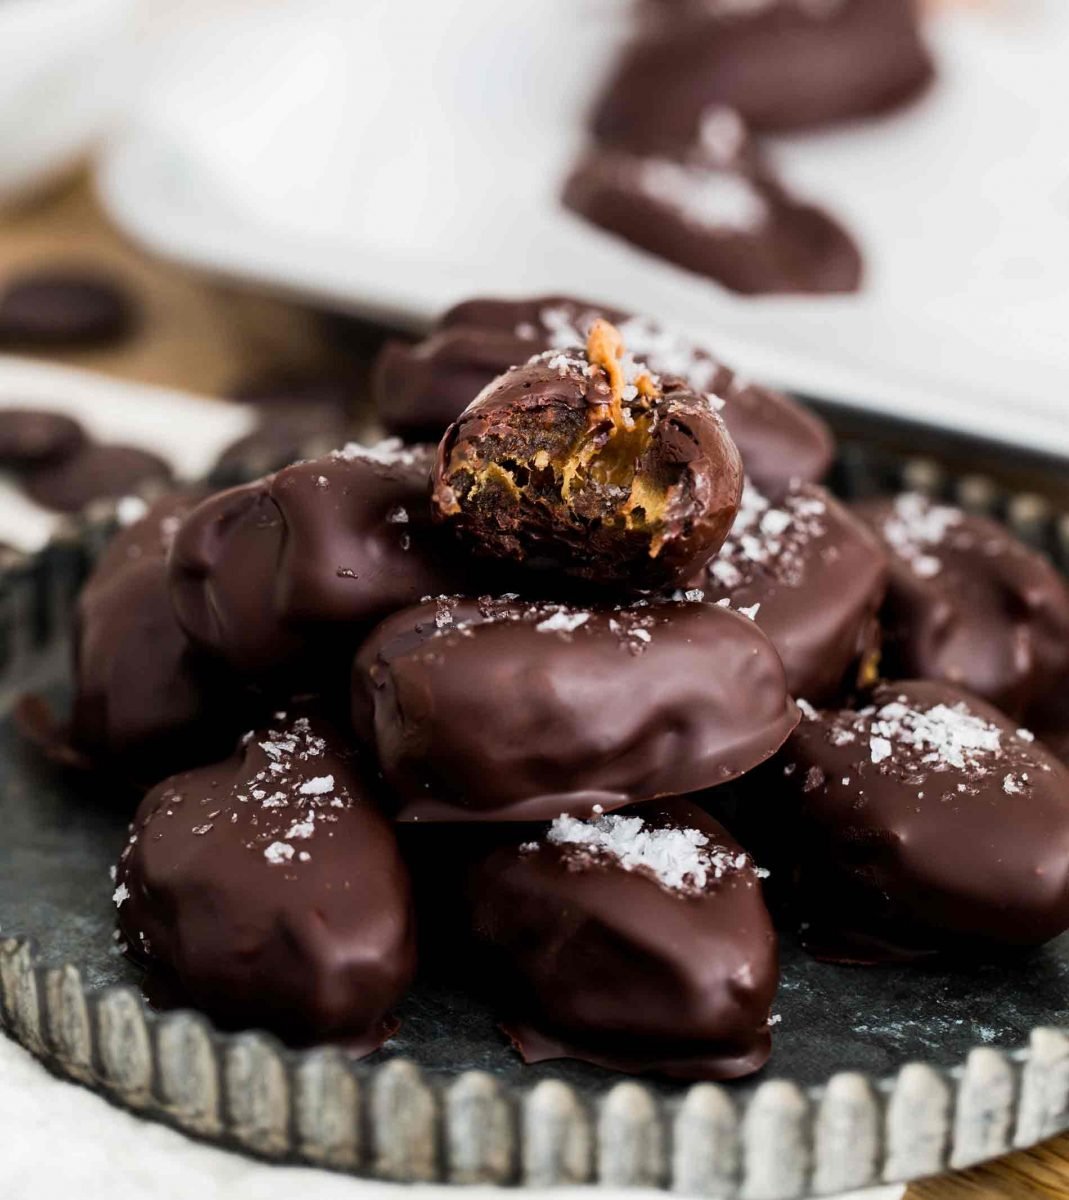 These chocolate covered stuffed dates are insanely easy to make and far too easy to eat just one. I dare you to resist having just one!